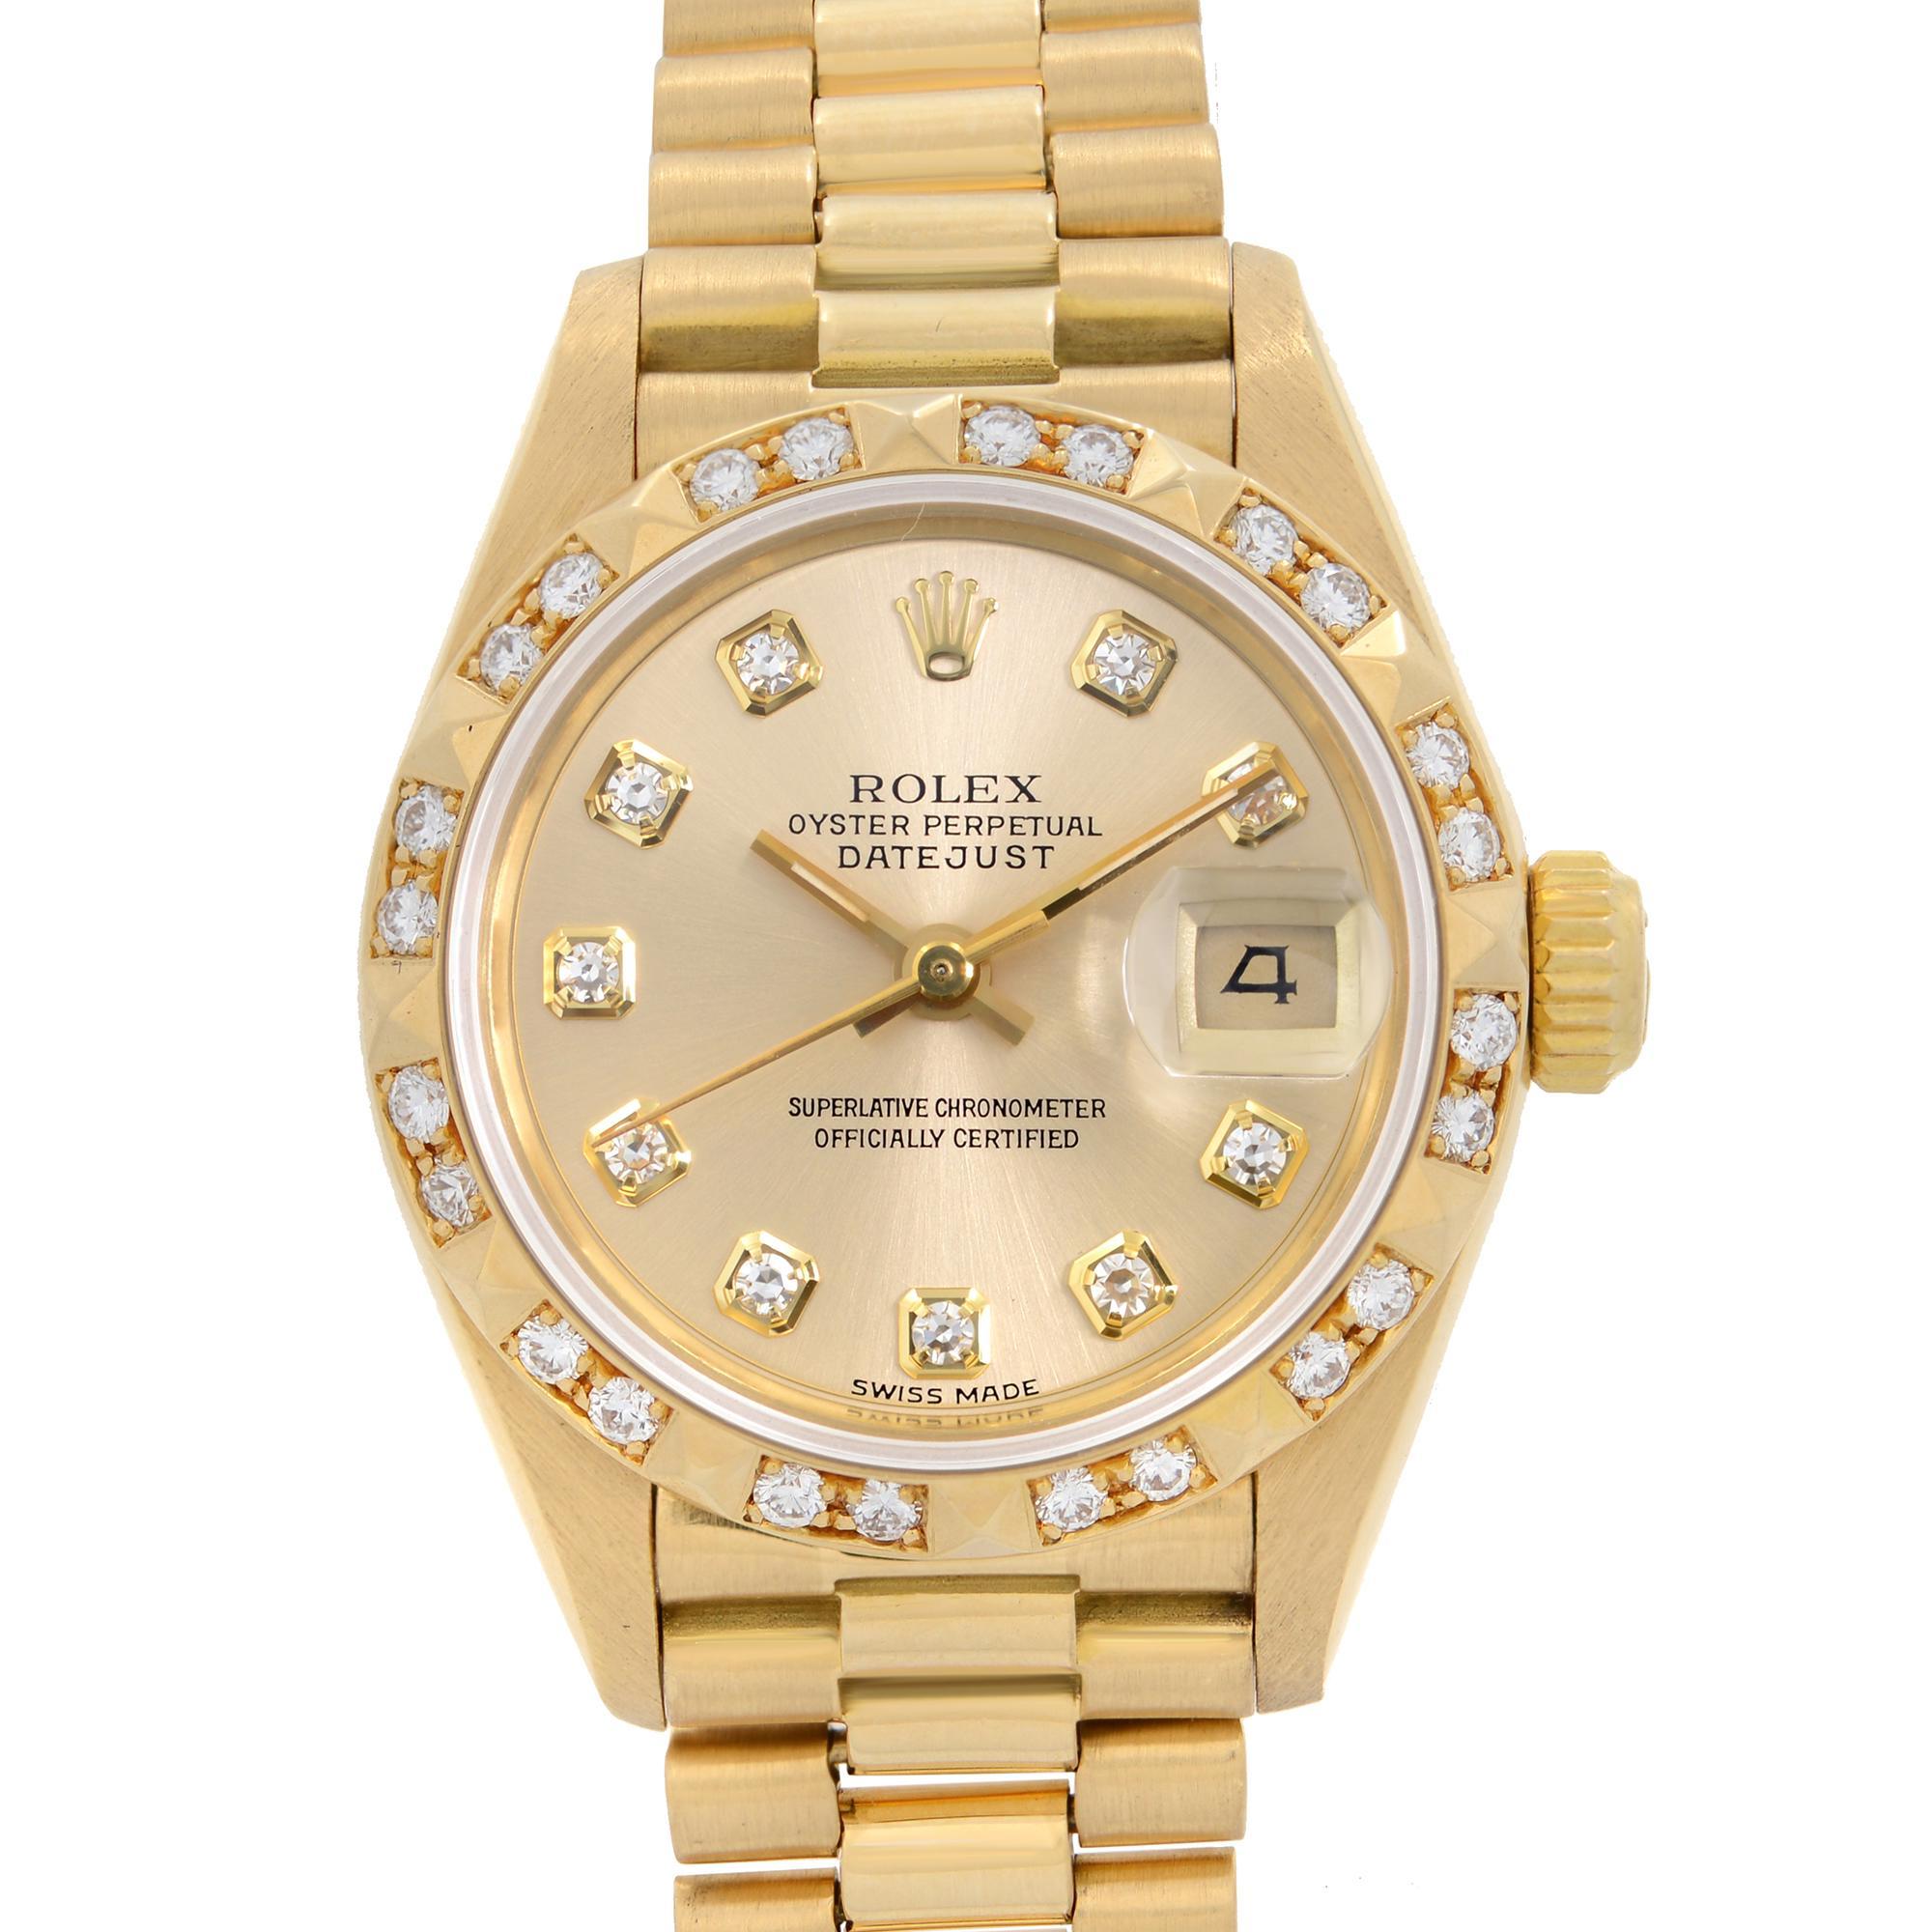 Pre-Owned, Factory Diamond, Bracelet Shows Moderate Slack. Vintage Rolex Datejust President 18K Gold Champagne Diamond Dial Ladies Watch 69258. This Beautiful Ladies Timepiece was Produced in 1989 and is Powered by Mechanical (Automatic) Movement